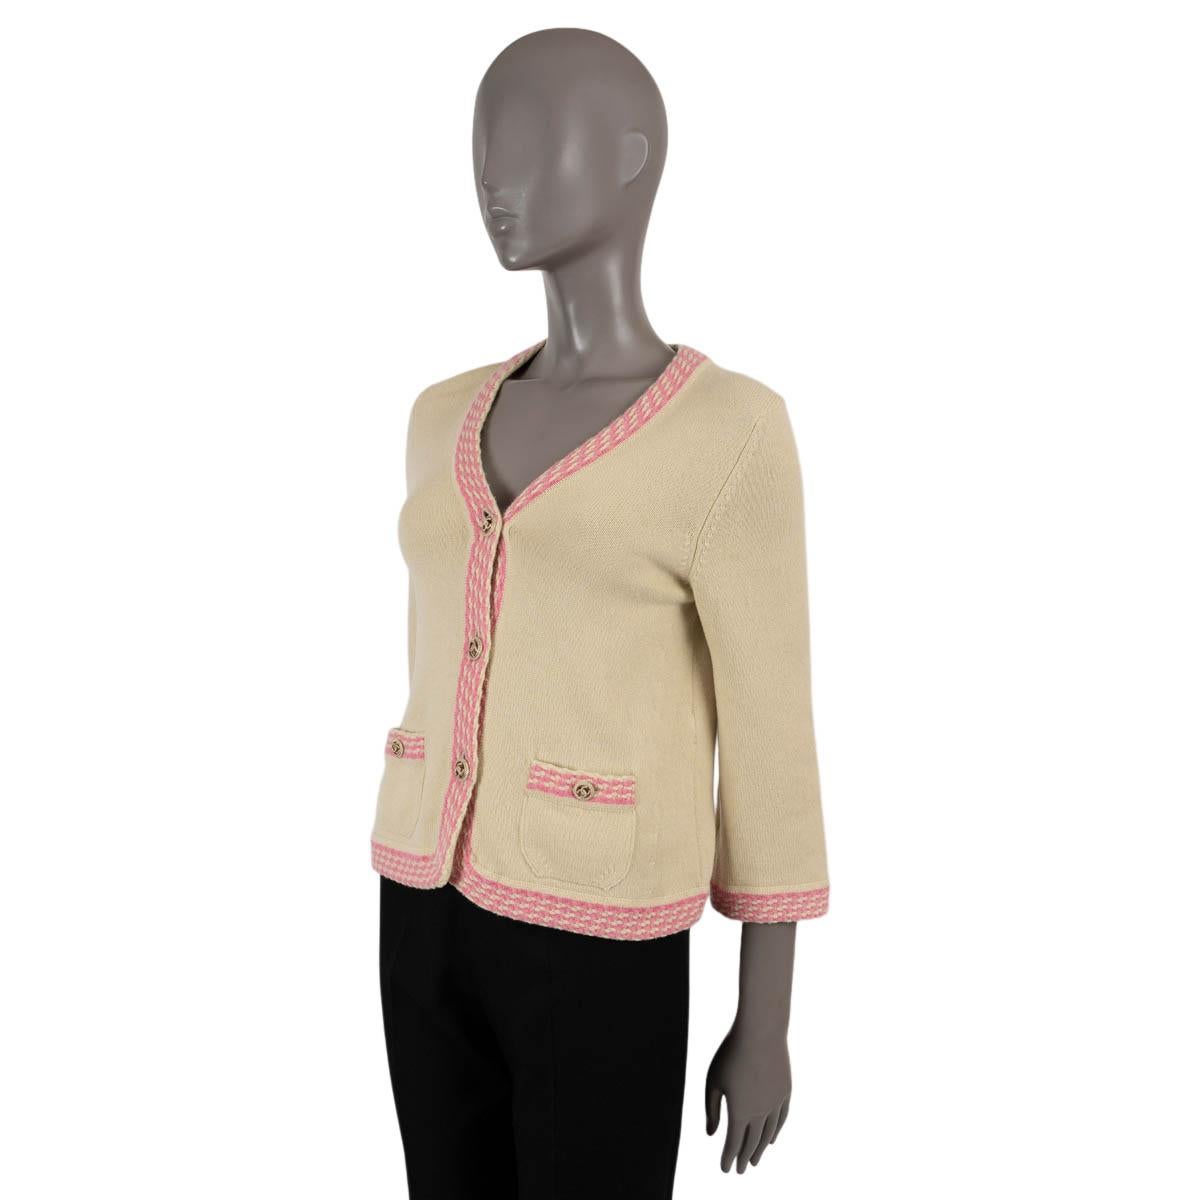 100% authentic Chanel v-neck cardigan in pistachio green cashmere (100%) with pink contrast trim. The design features pistachio green and gold-tone CC logo buttons. Has been worn and is in excellent condition. 

2011